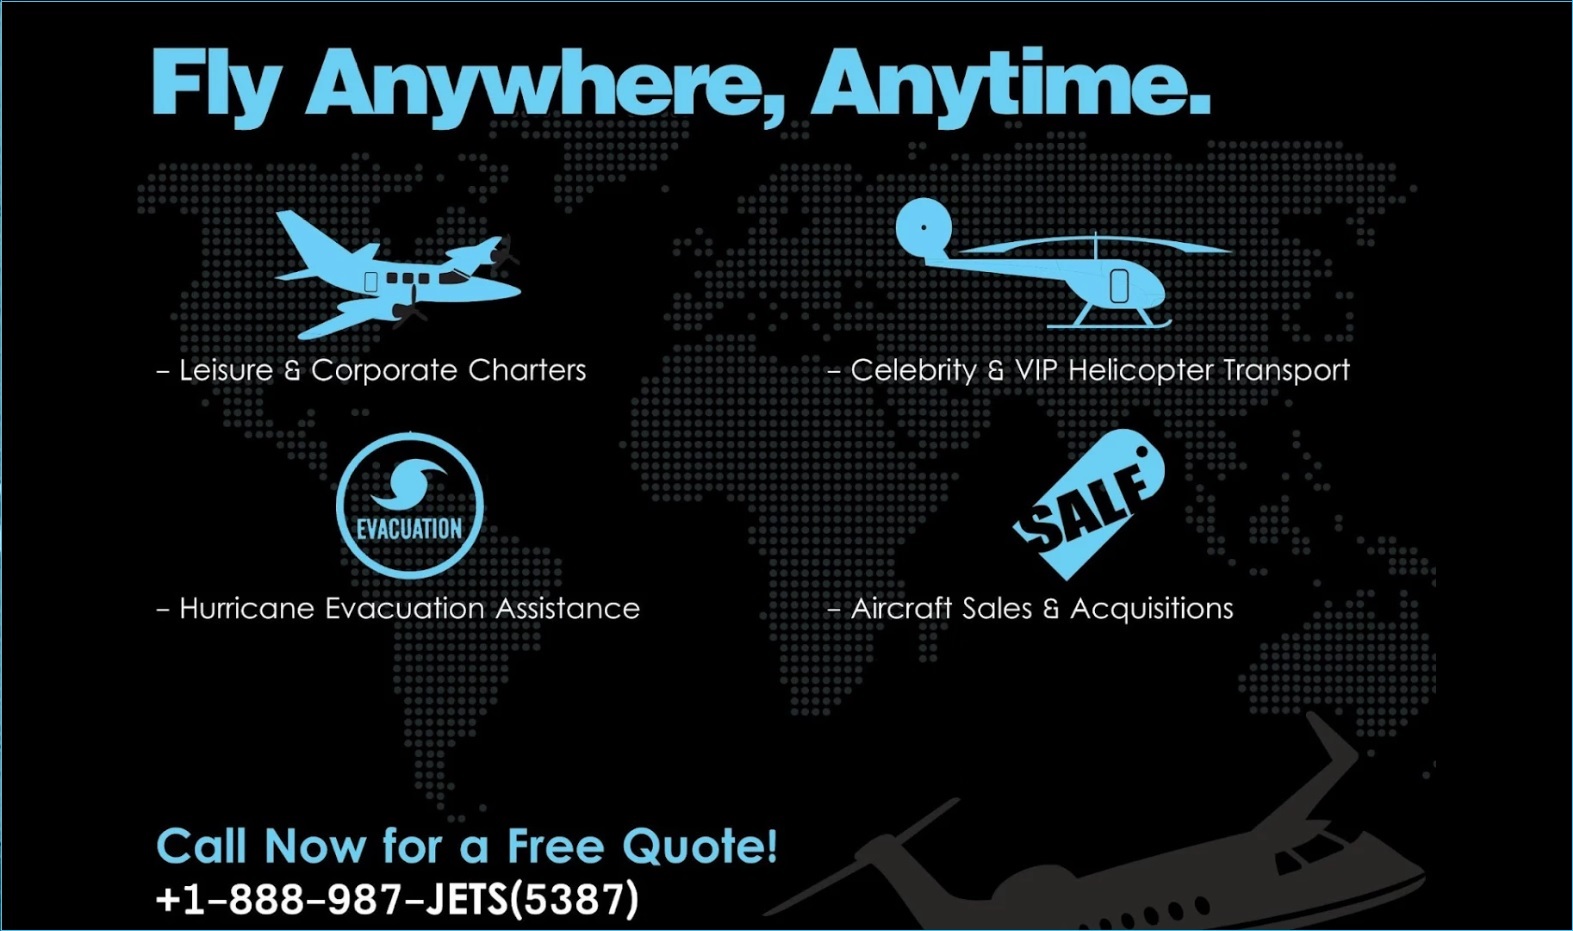 Charter Services, private jet, fly anytime, on demand,